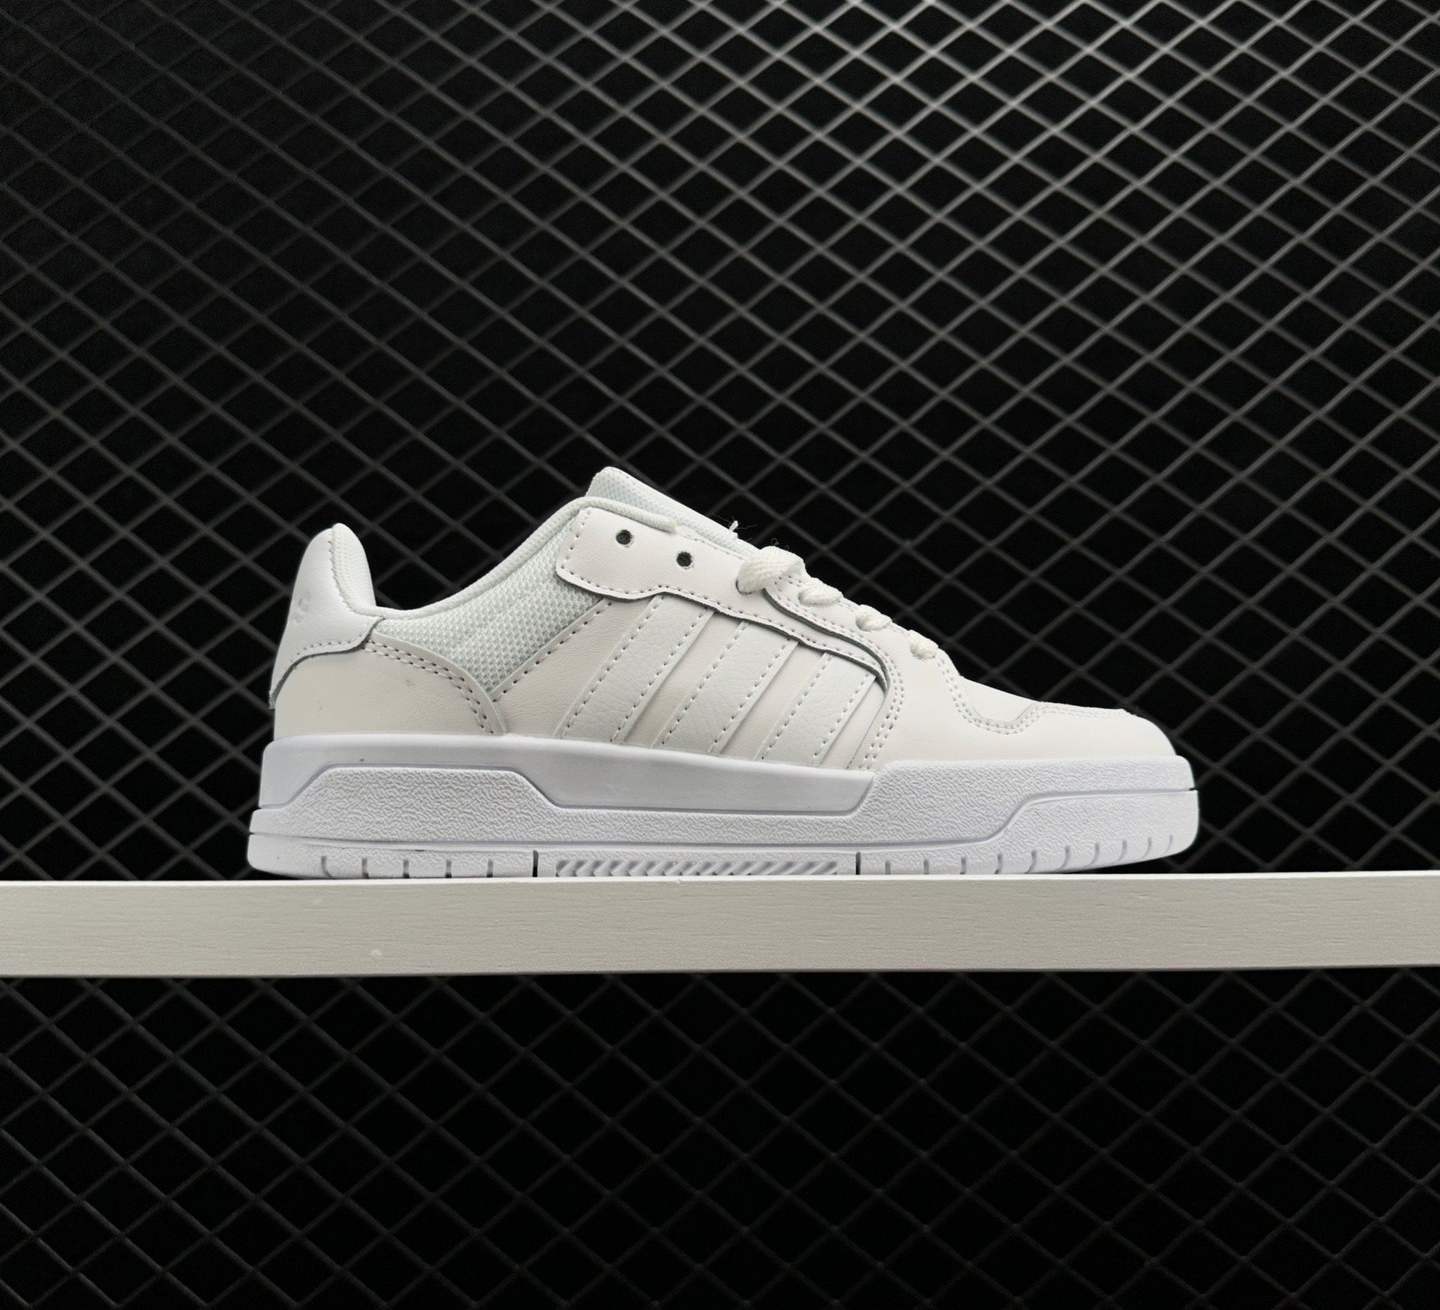 Adidas Neo Entrap White: Stylish and Proven Comfort